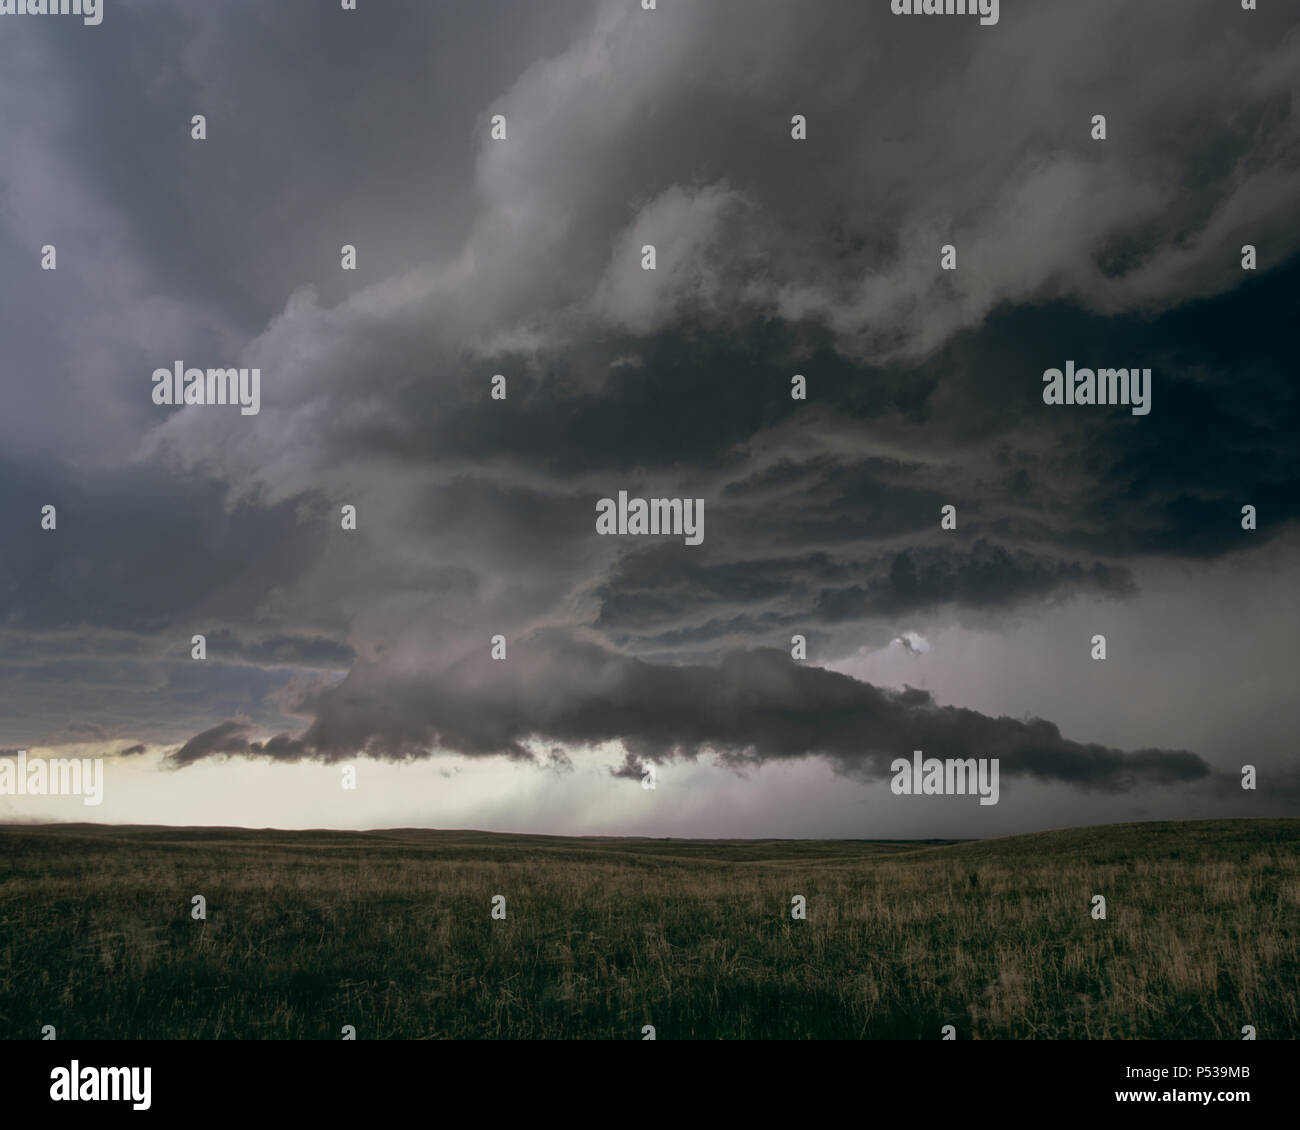 A wall cloud forms under a rotating supercell thunderstorm, over farmland in Nebraska, USA Stock Photo